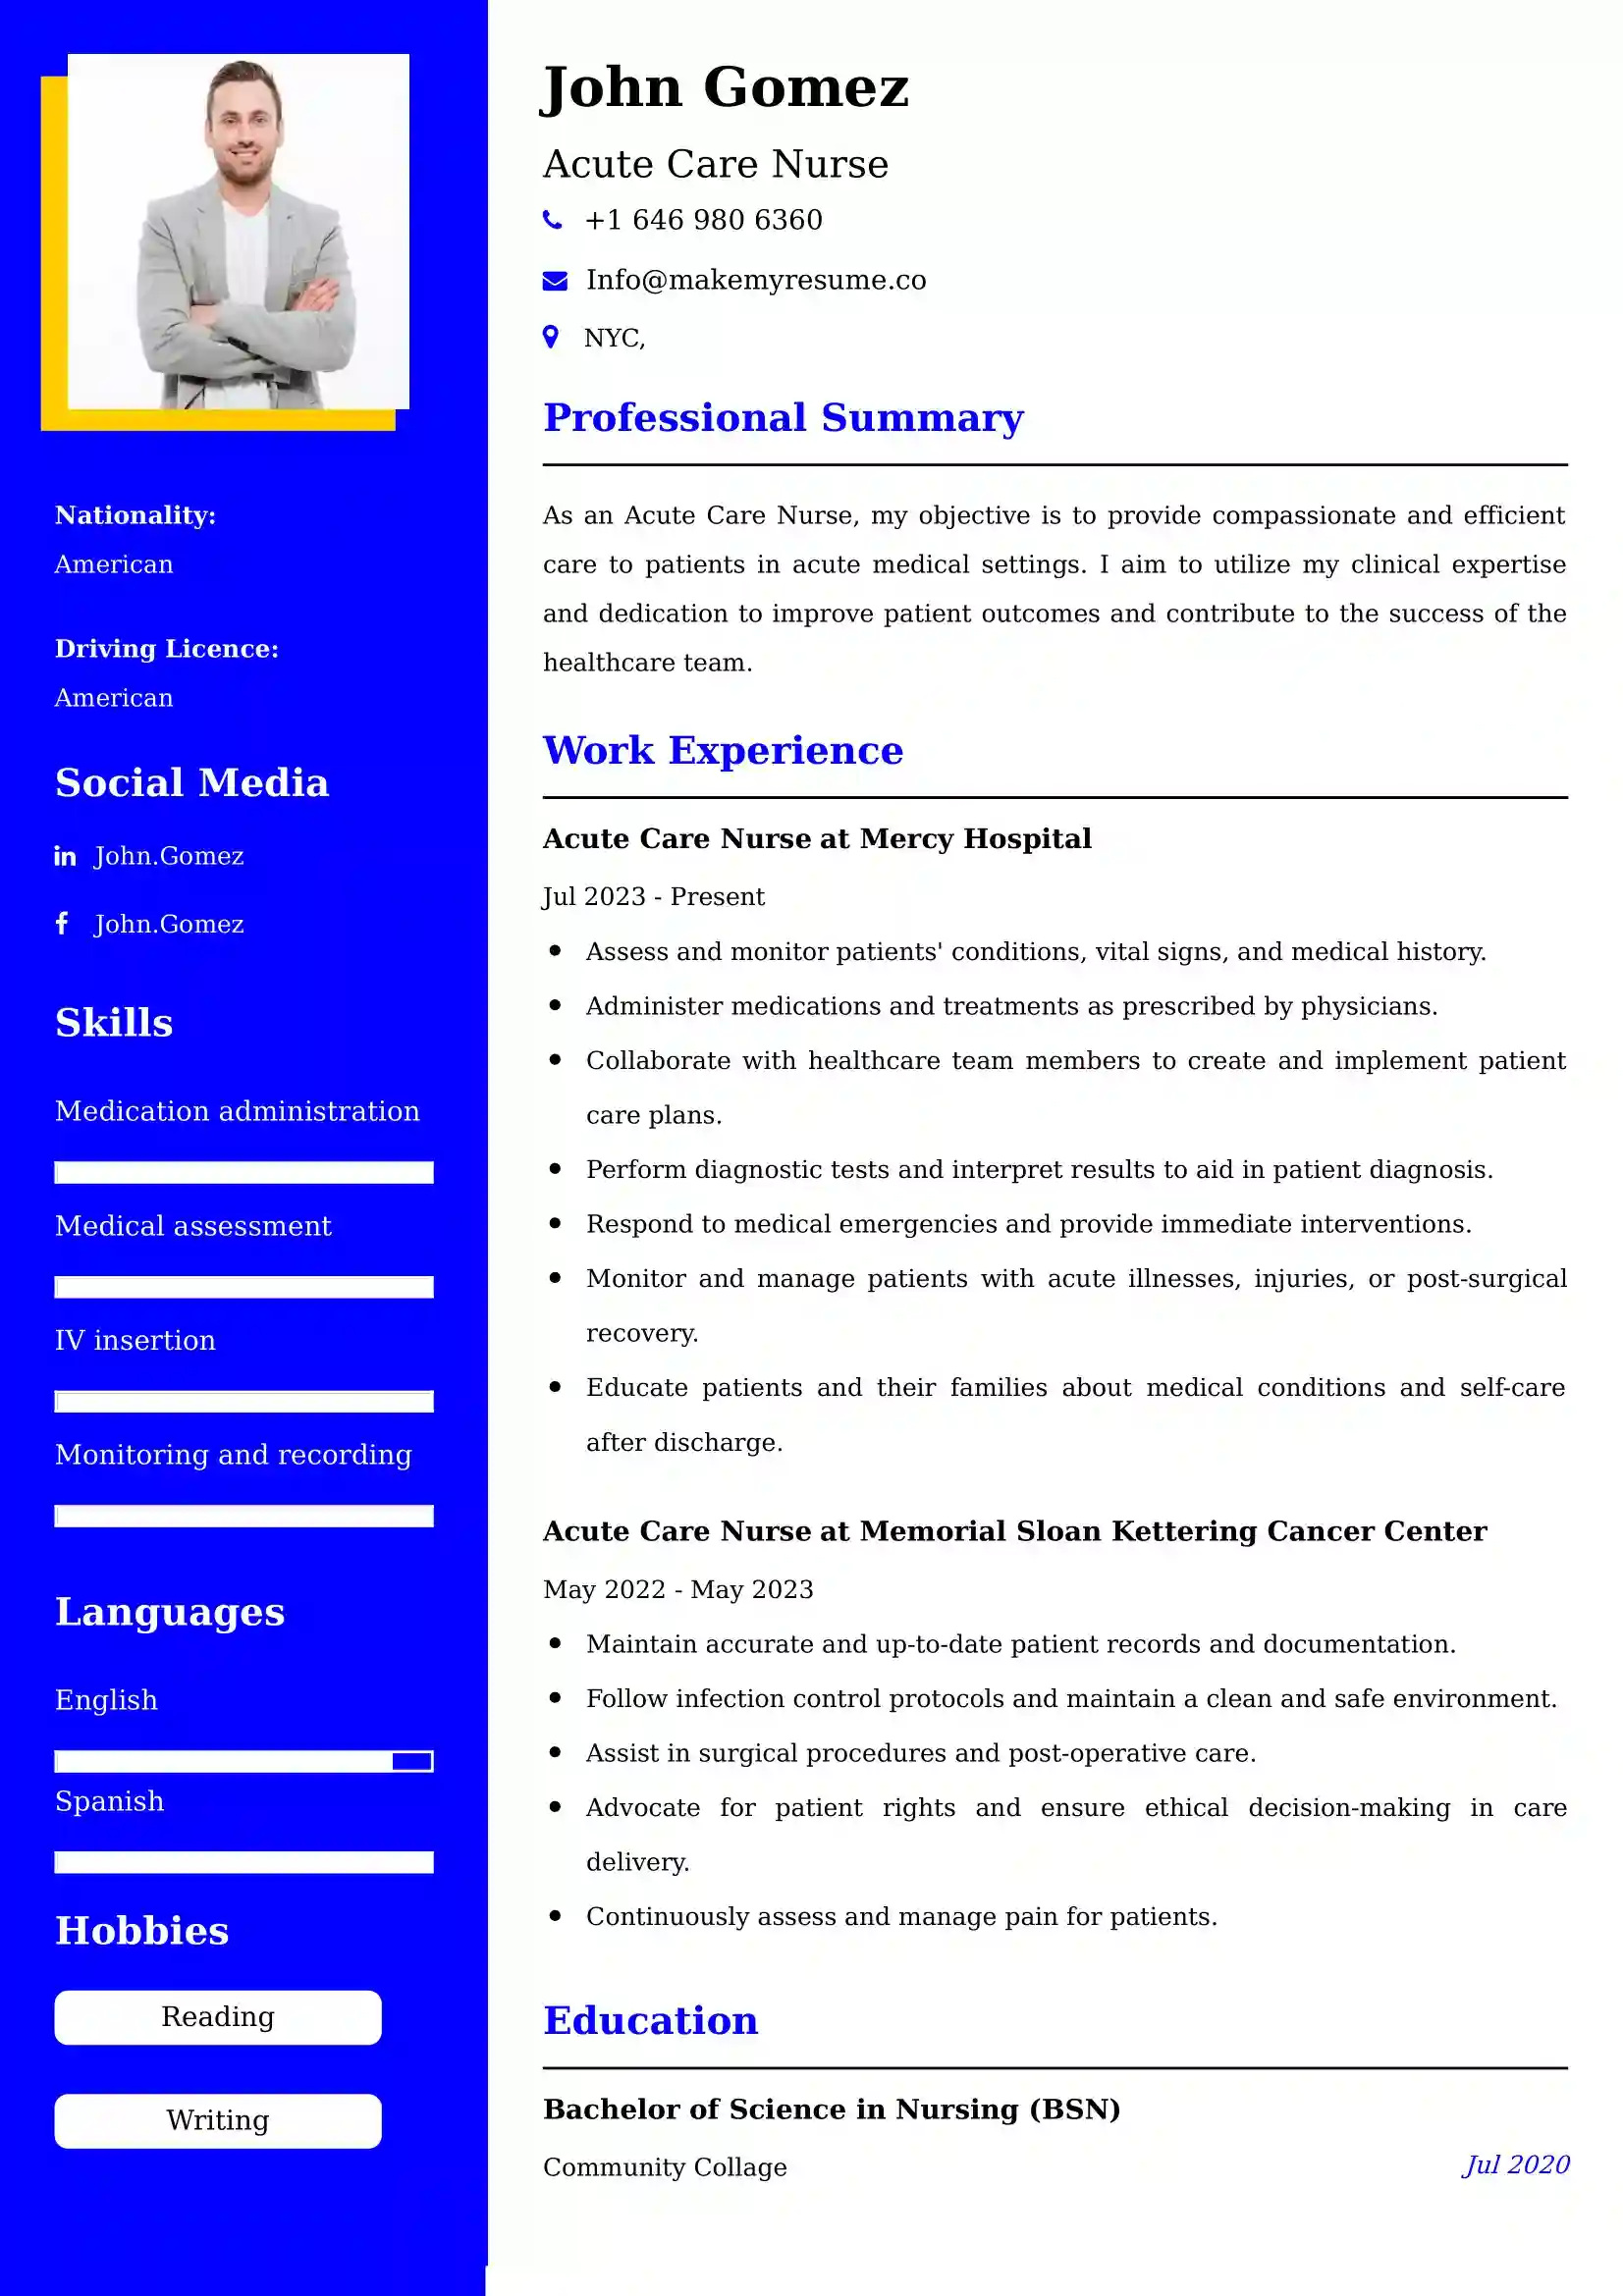 Acute Care Nurse Resume Examples - UAE Format and Tips.